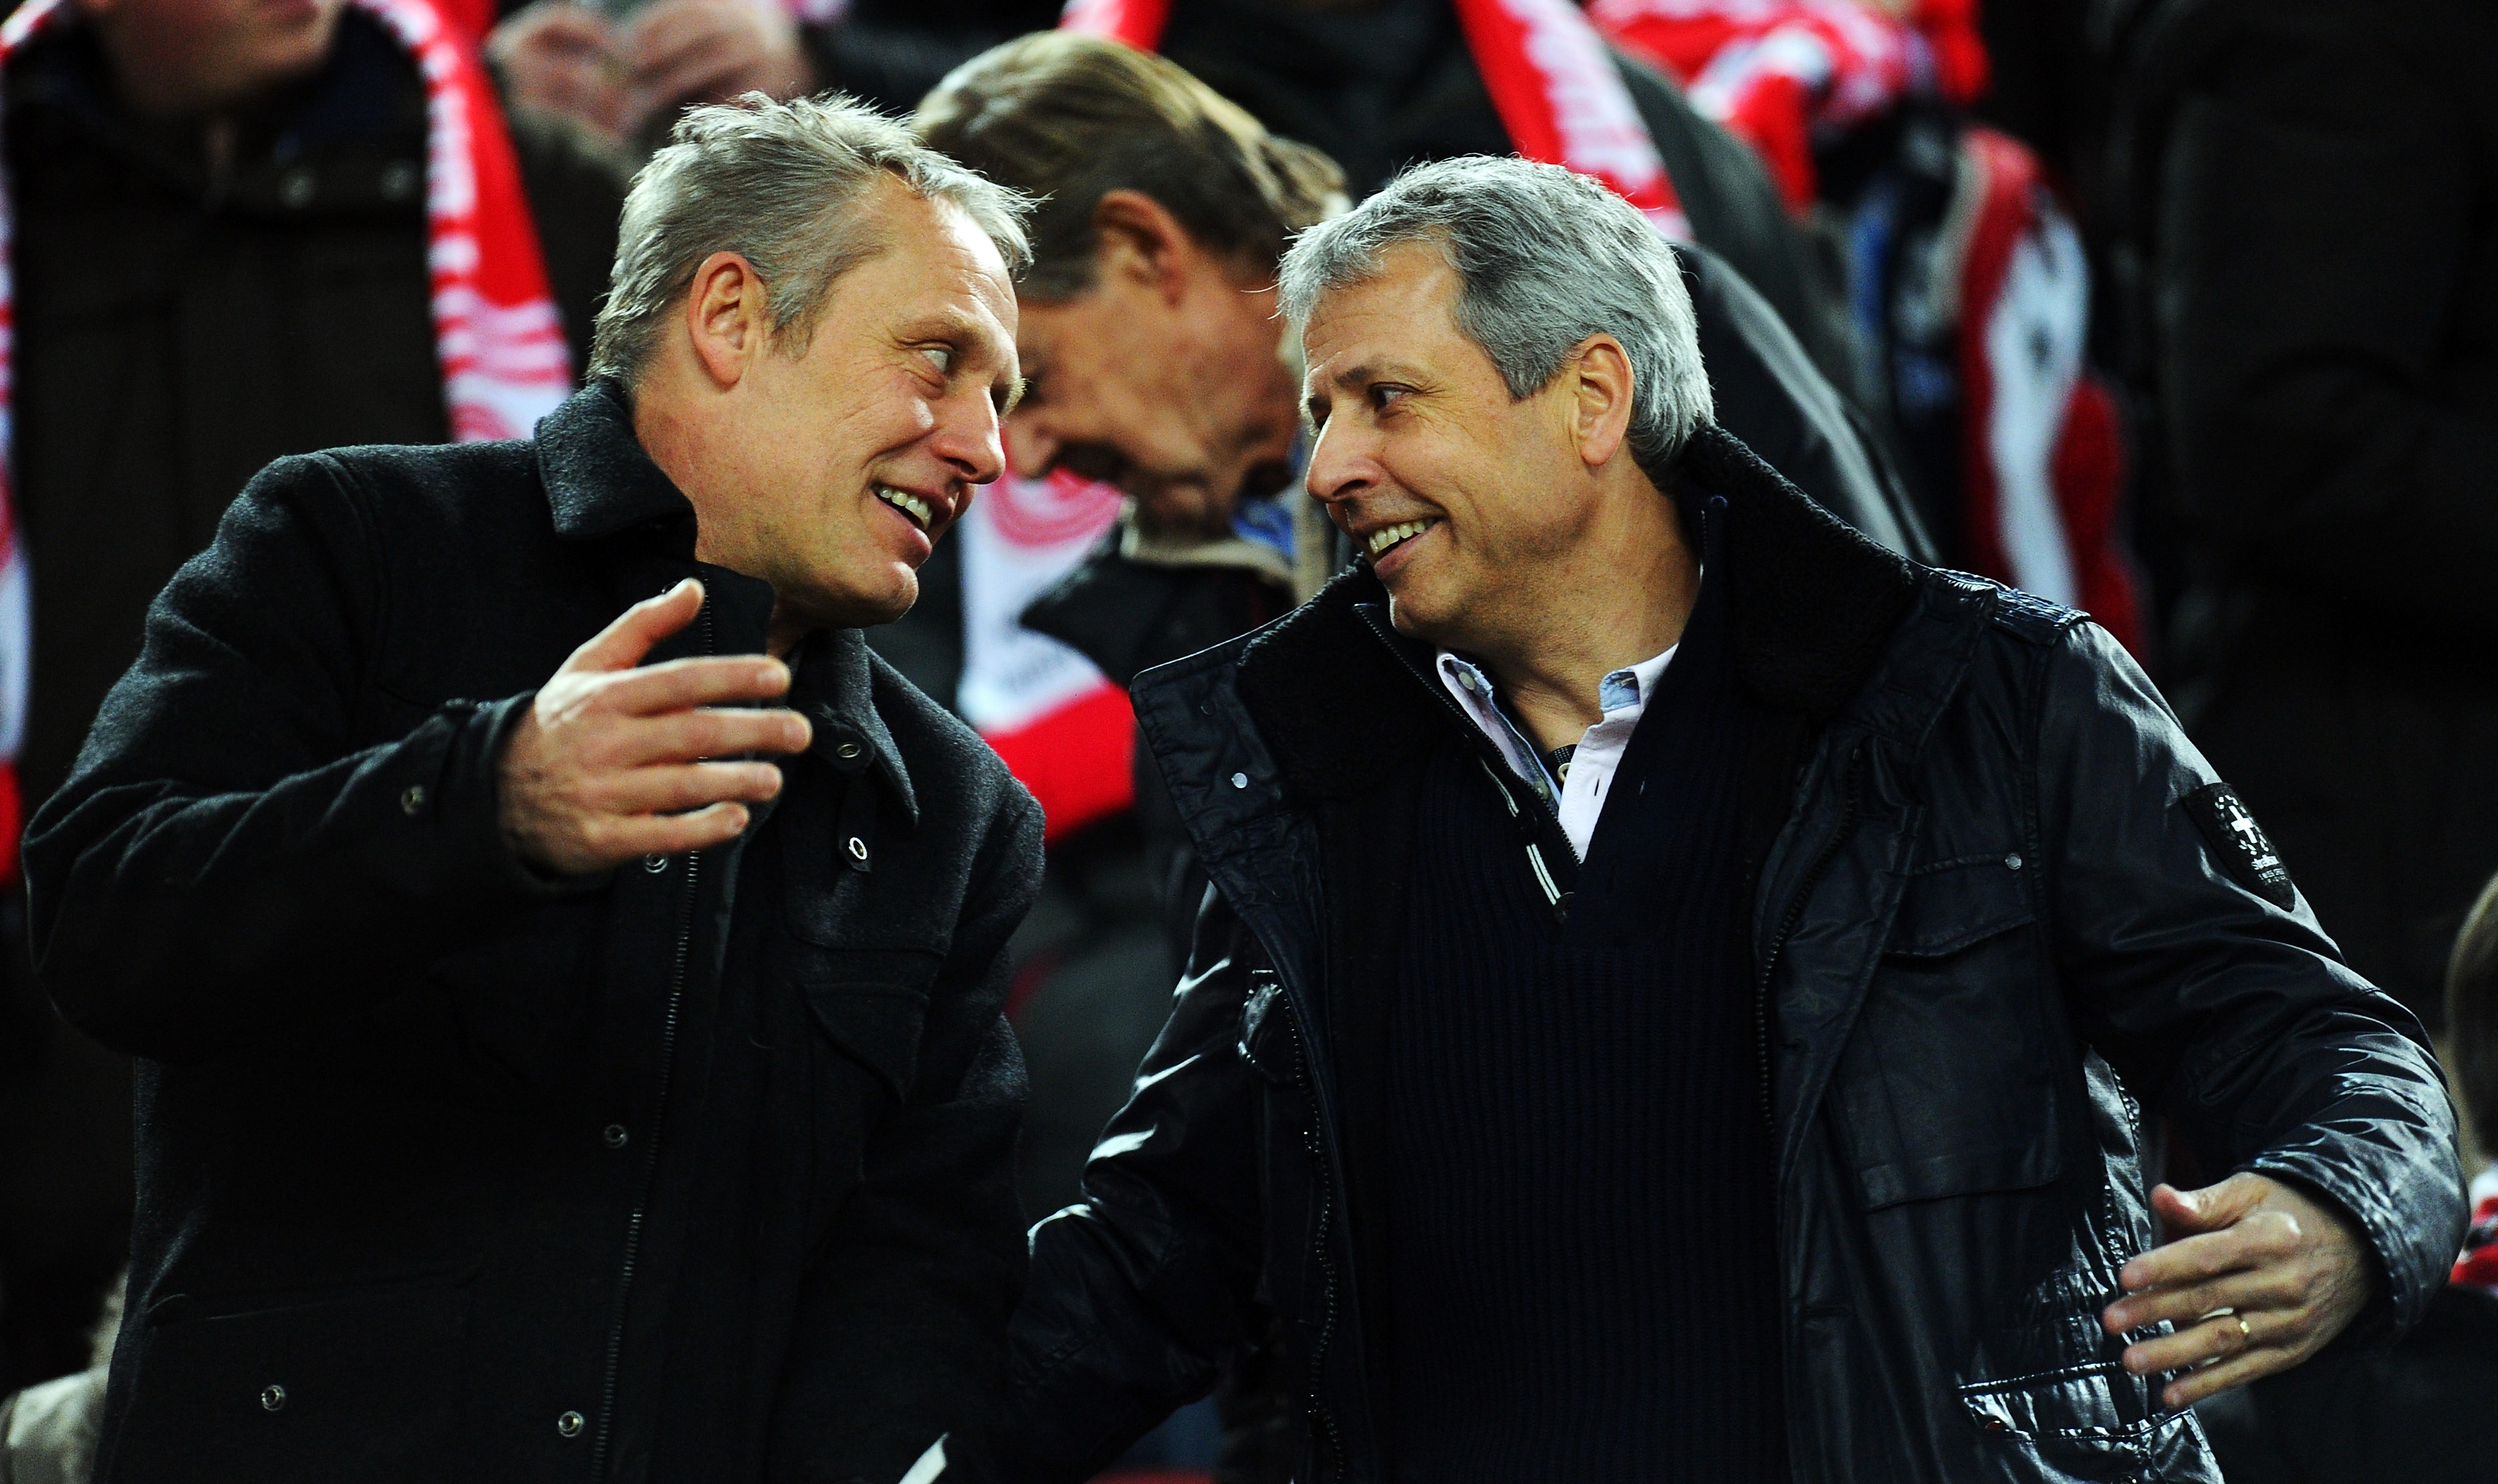 DUESSELDORF, GERMANY - JANUARY 20: Christian Streich, head coach of SC Freiburg, speaks with Lucien Favre, head coach of Borussia Moenchengladbach, during the Bundesliga match between Fortuna Duesseldorf 1895 and FC Augsburg at Esprit-Arena on January 20, 2013 in Duesseldorf, Germany.  (Photo by Lars Baron/Bongarts/Getty Images)